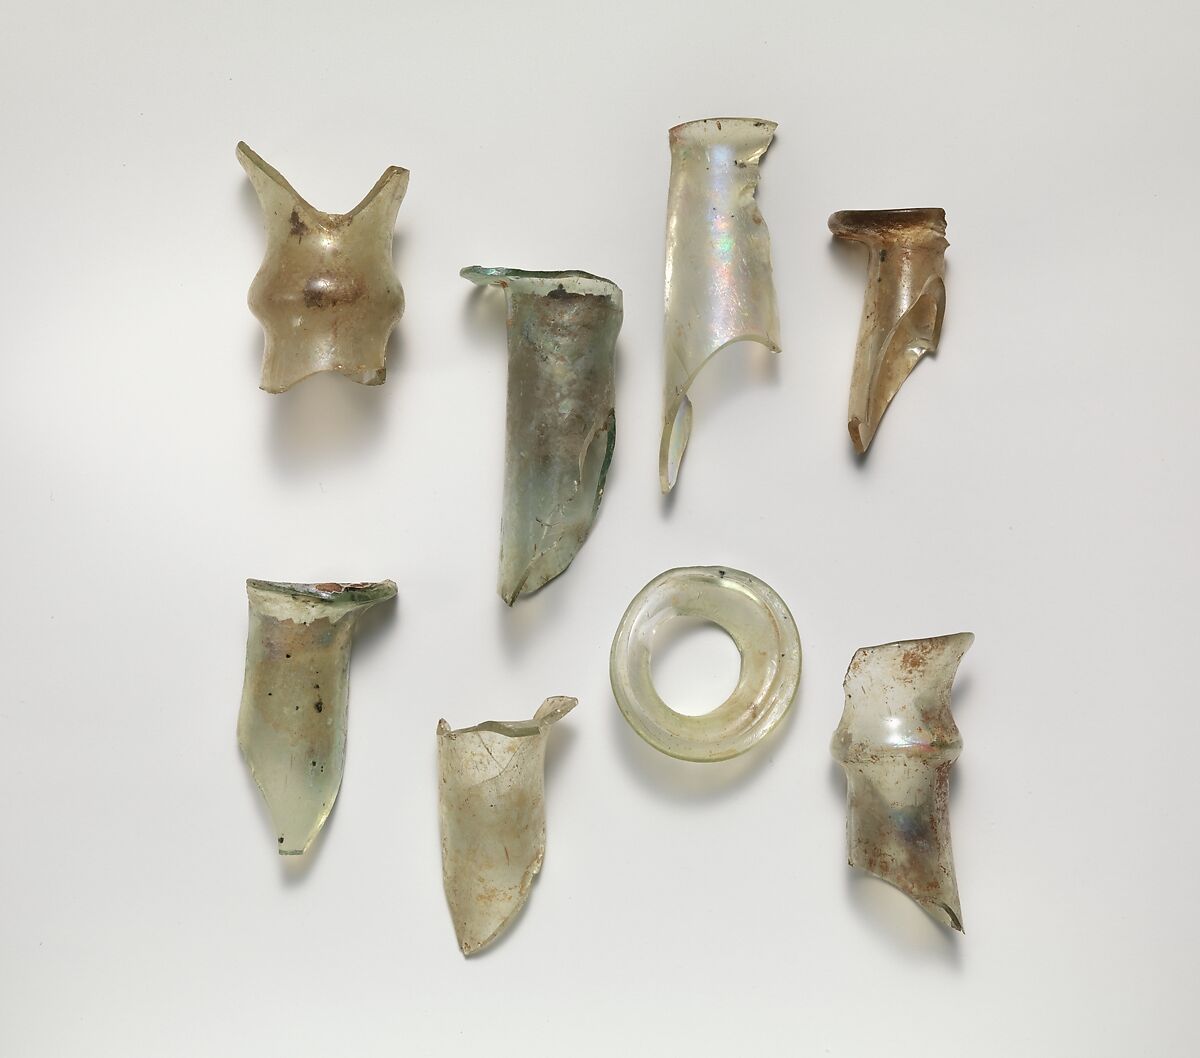 Fragments, Glass, ceramic, European and Middle Eastern 